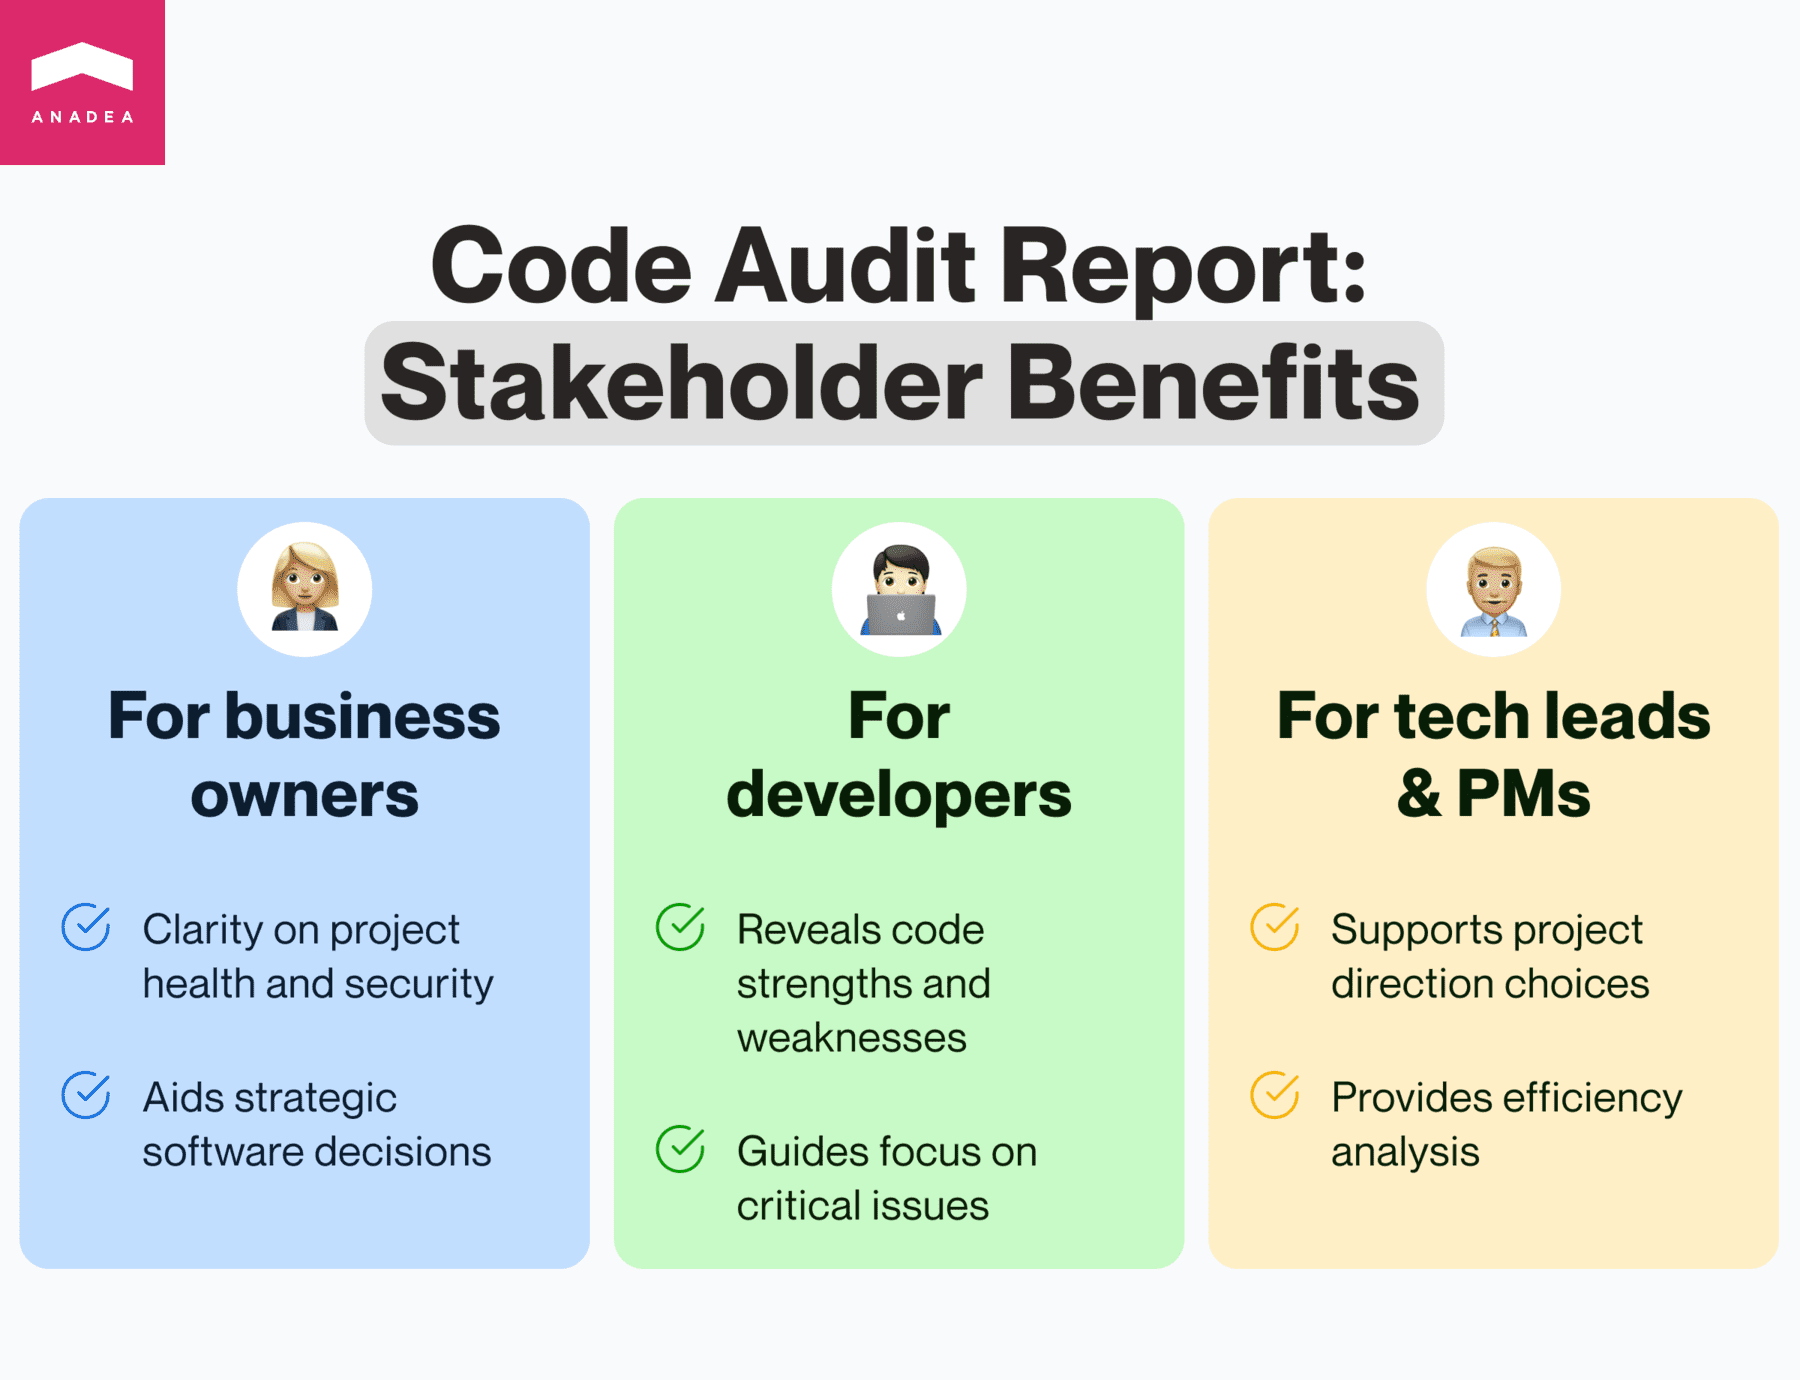 Benefits of code audit for businesses, developers, and team leads